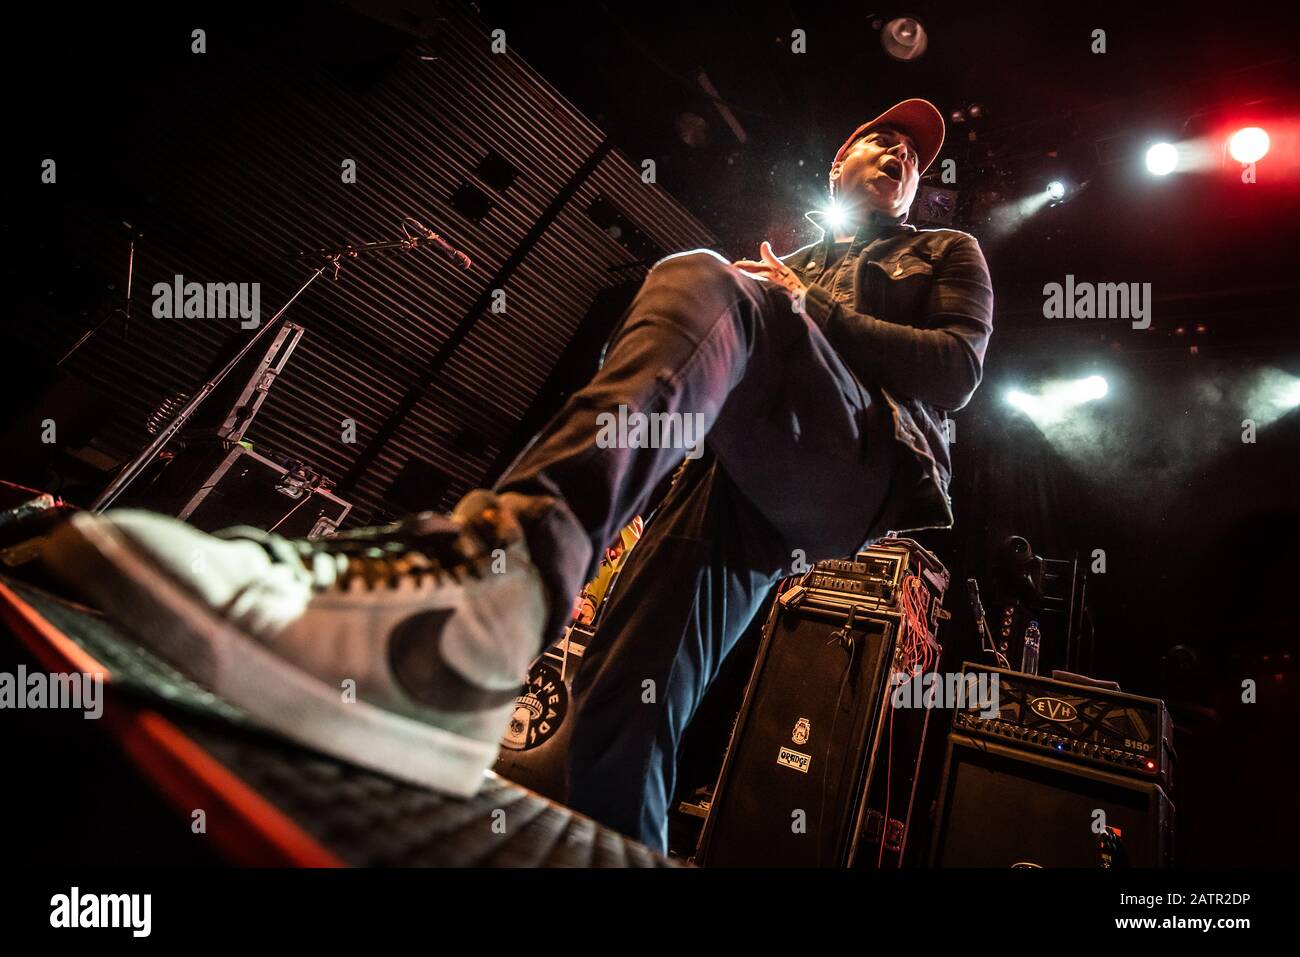 Zebrahead Band High Resolution Stock Photography and Images - Alamy